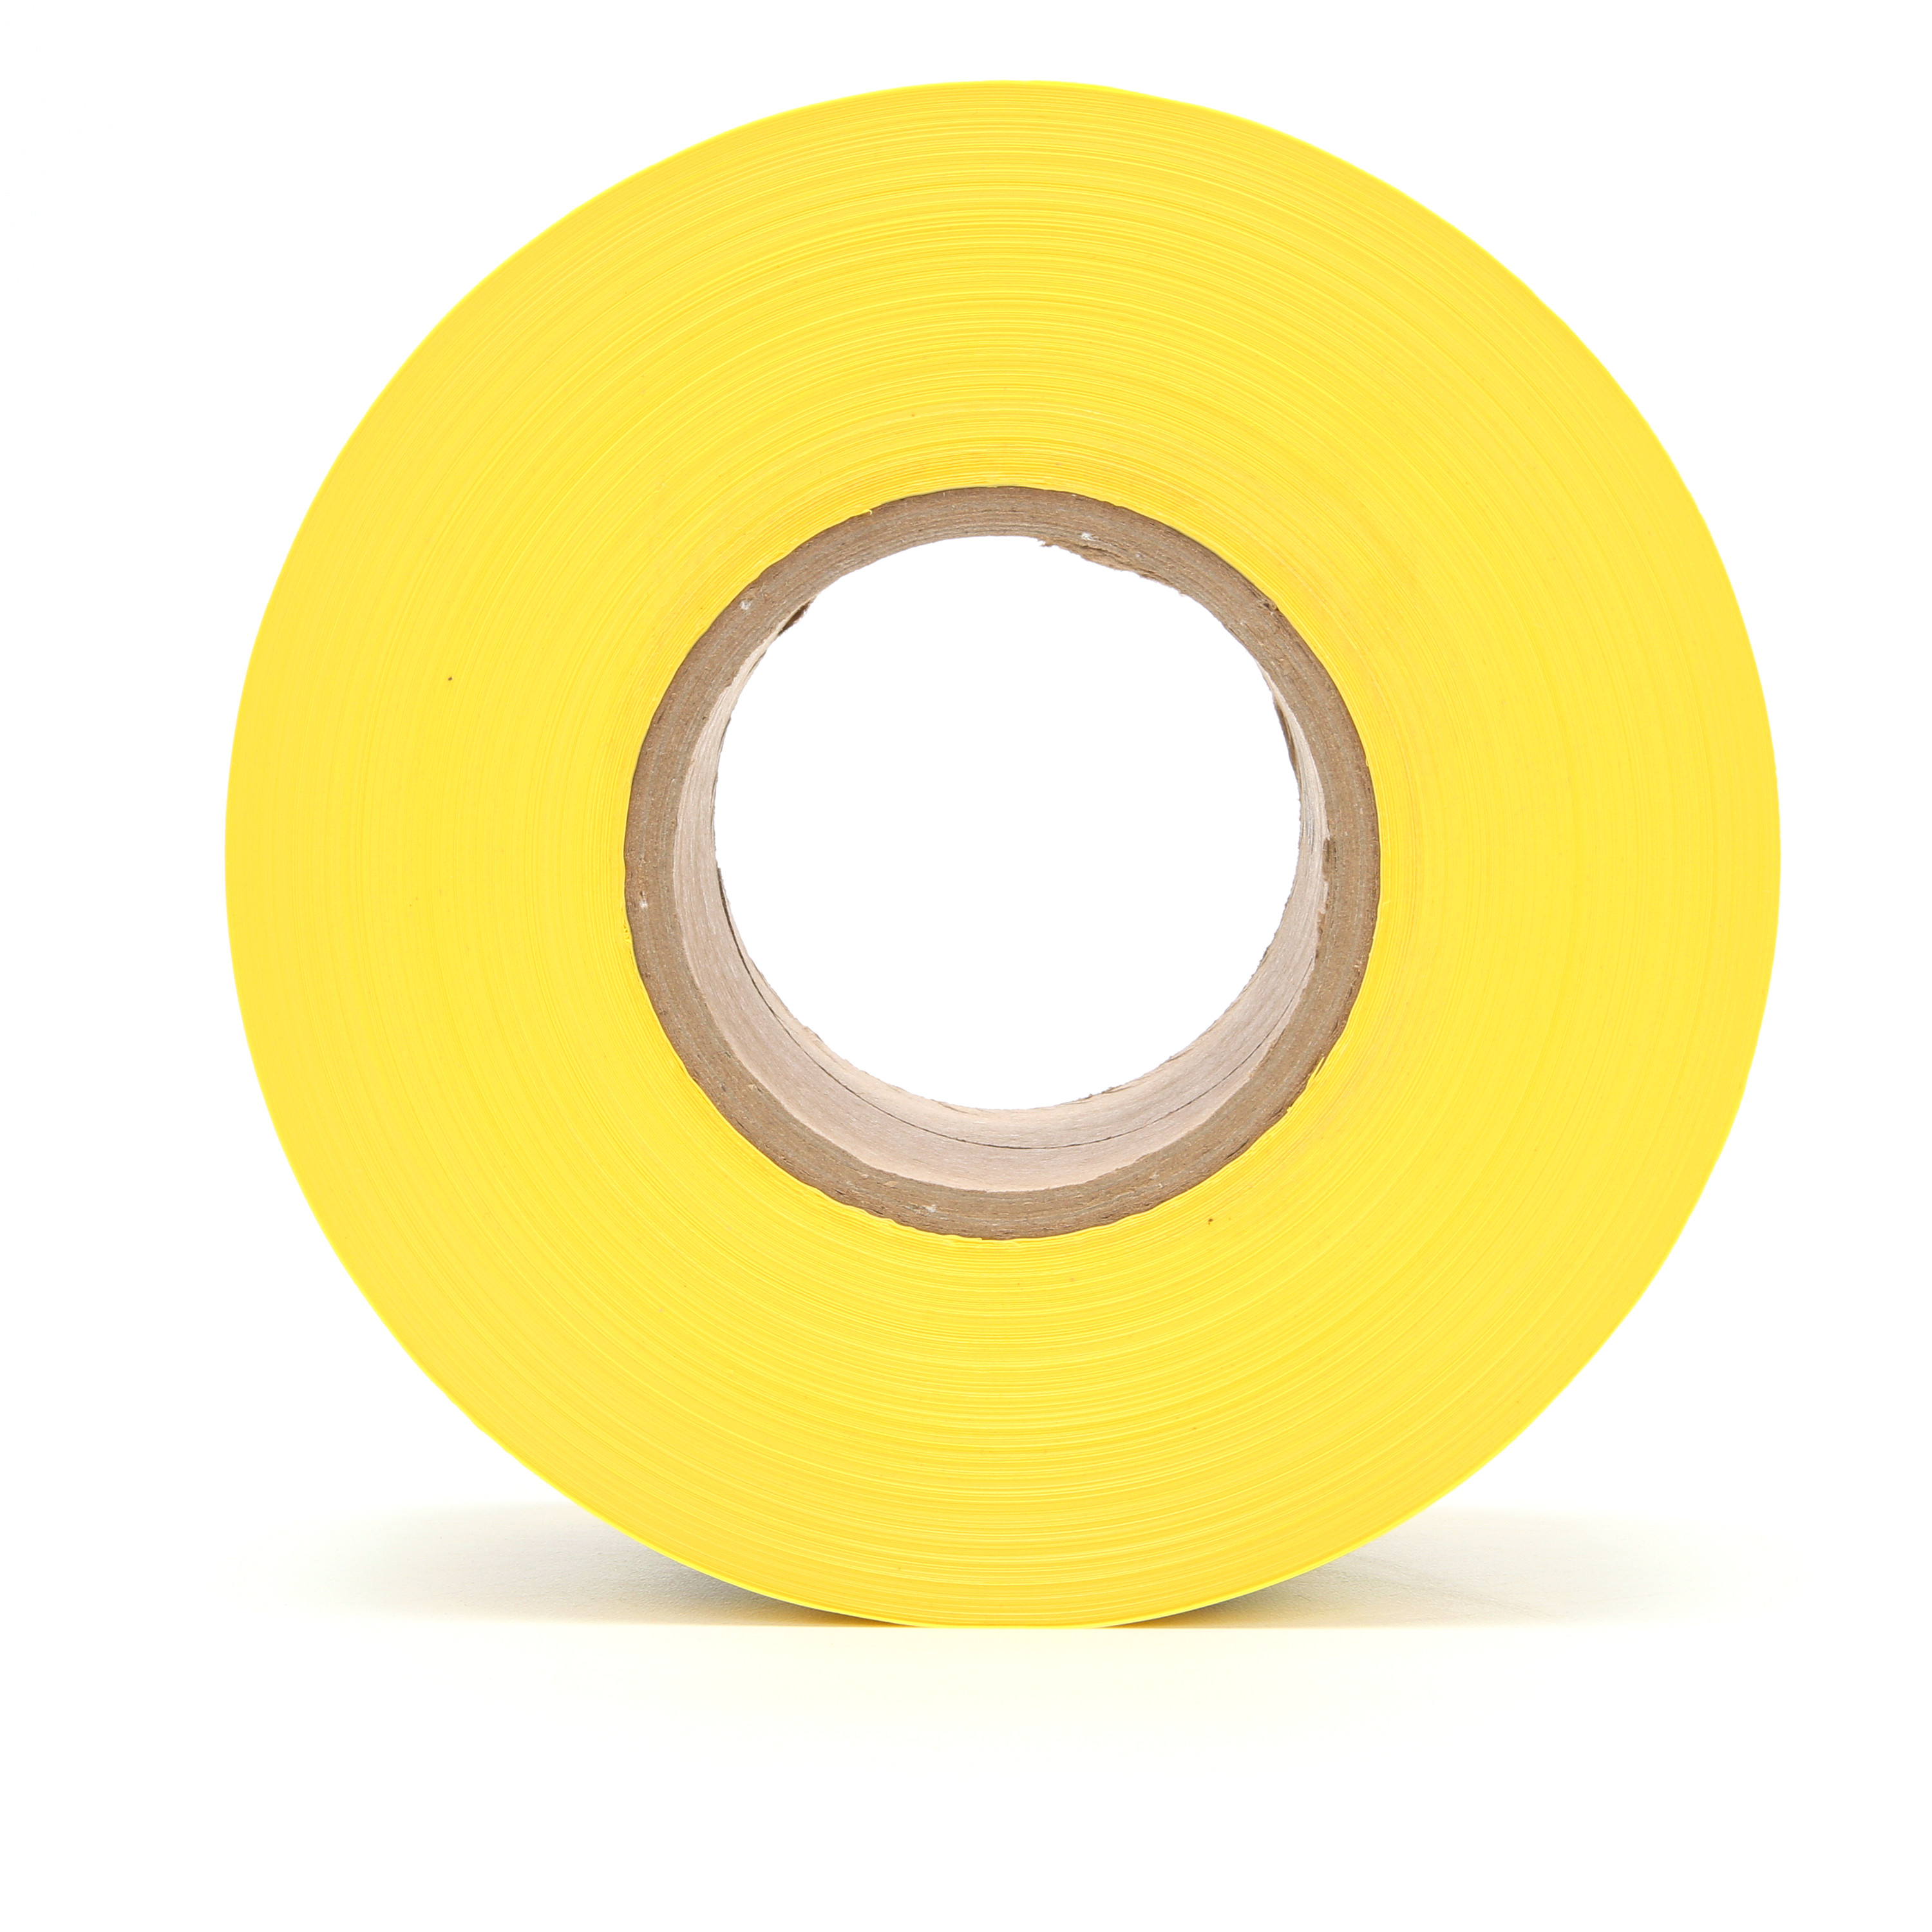 Scotch® Barricade Tape 333, CAUTION DO NOT ENTER, 3 in x 1000 ft,
Yellow, 8 rolls/Case